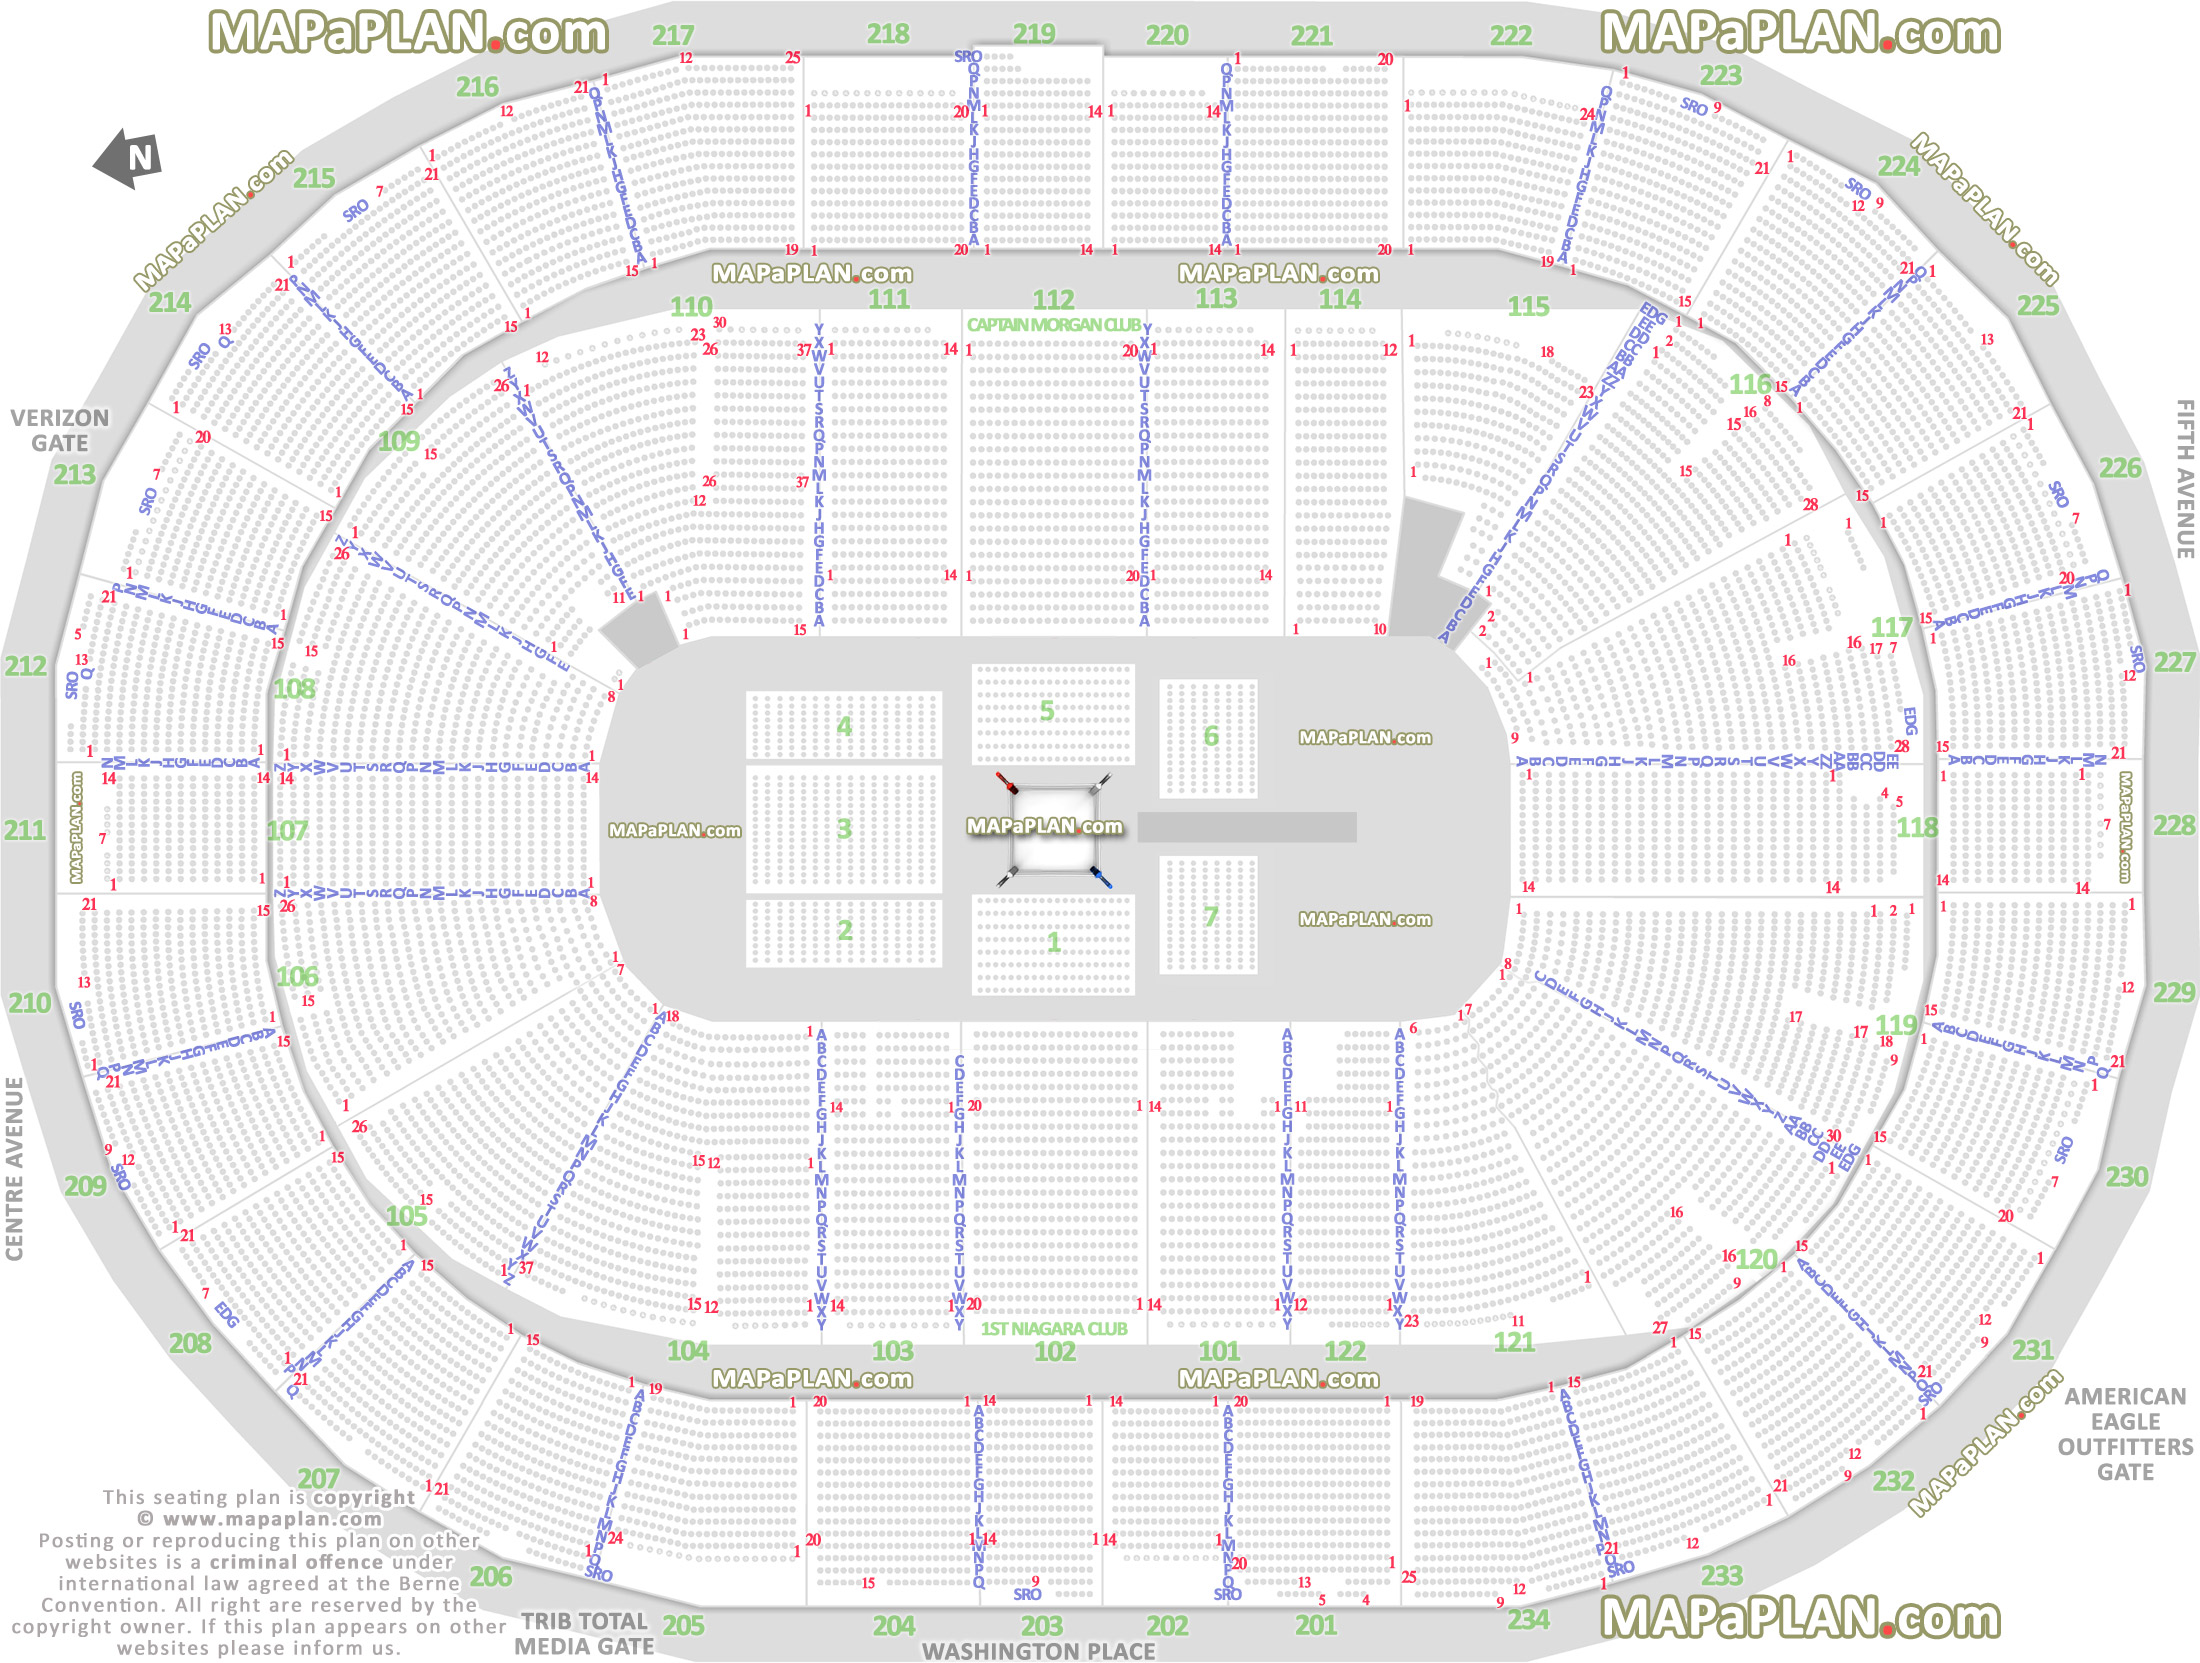 wwe raw smackdown live wrestling boxing match events 360 round ring configuration sro standing room only rows good bad edge side seats luxury private sections Pittsburgh Consol Energy Center seating chart